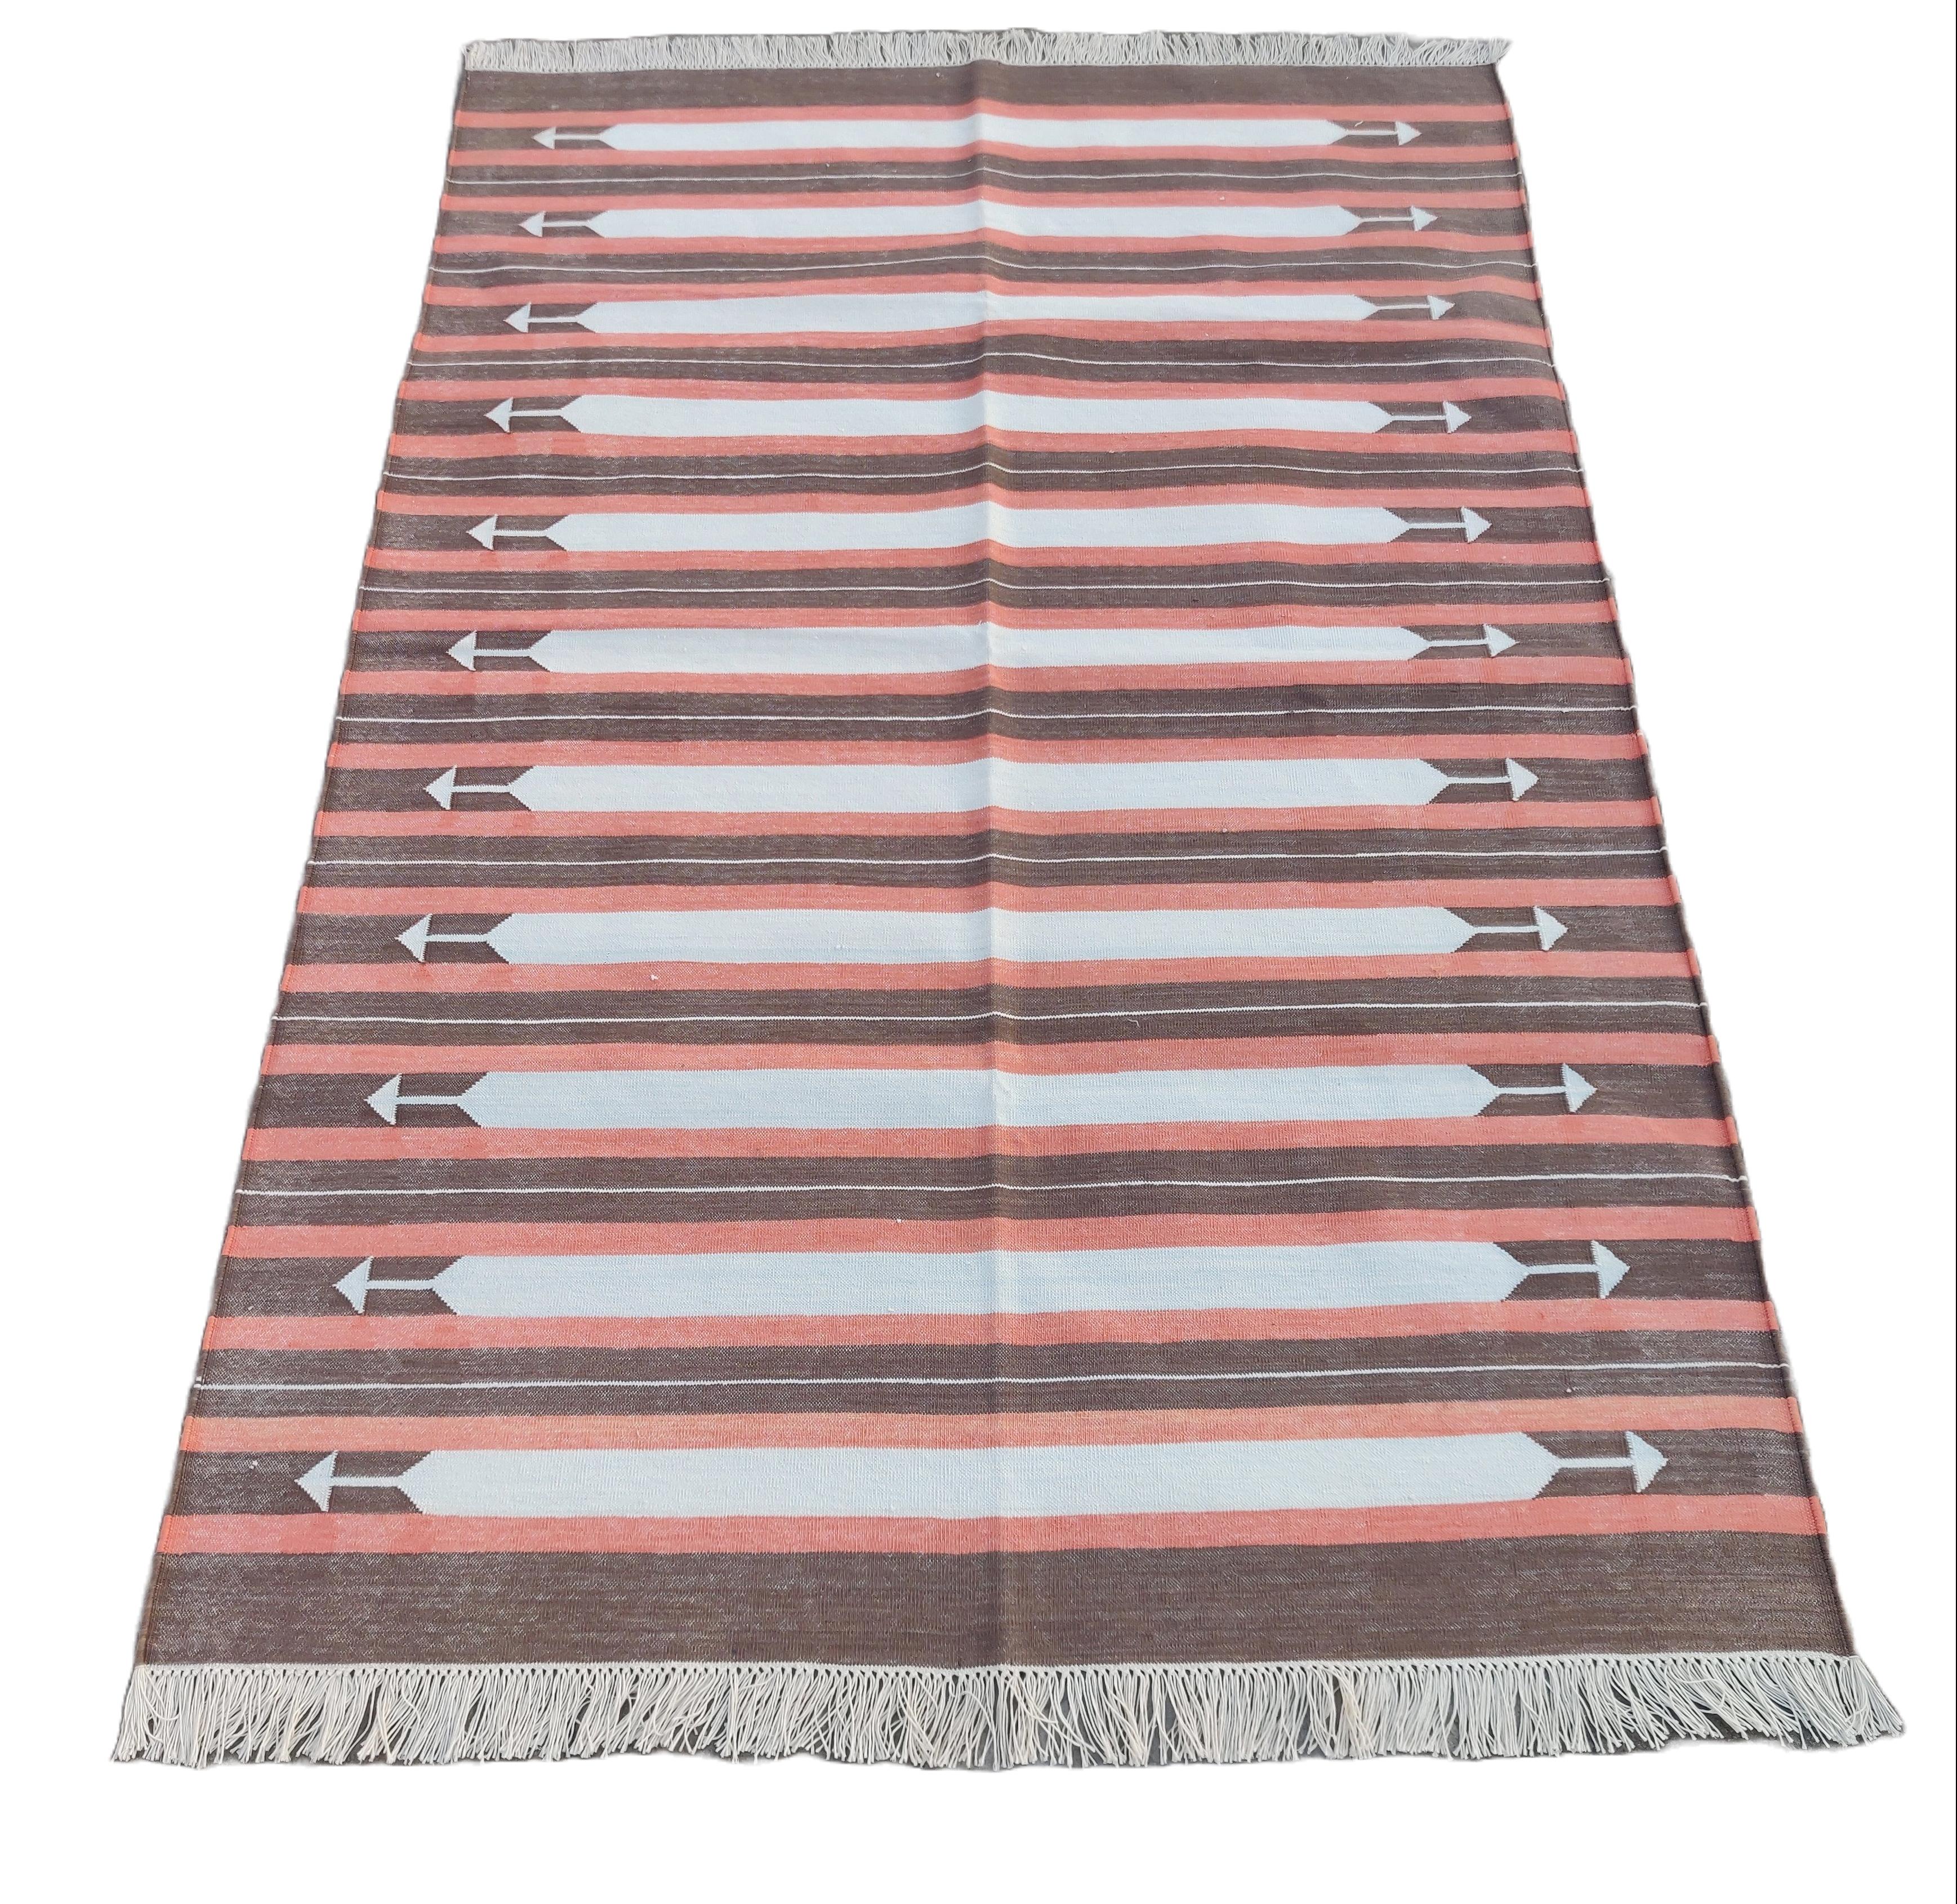 Handmade Cotton Area Flat Weave Rug, 4x6 Brown And Coral Striped Indian Dhurrie In New Condition For Sale In Jaipur, IN